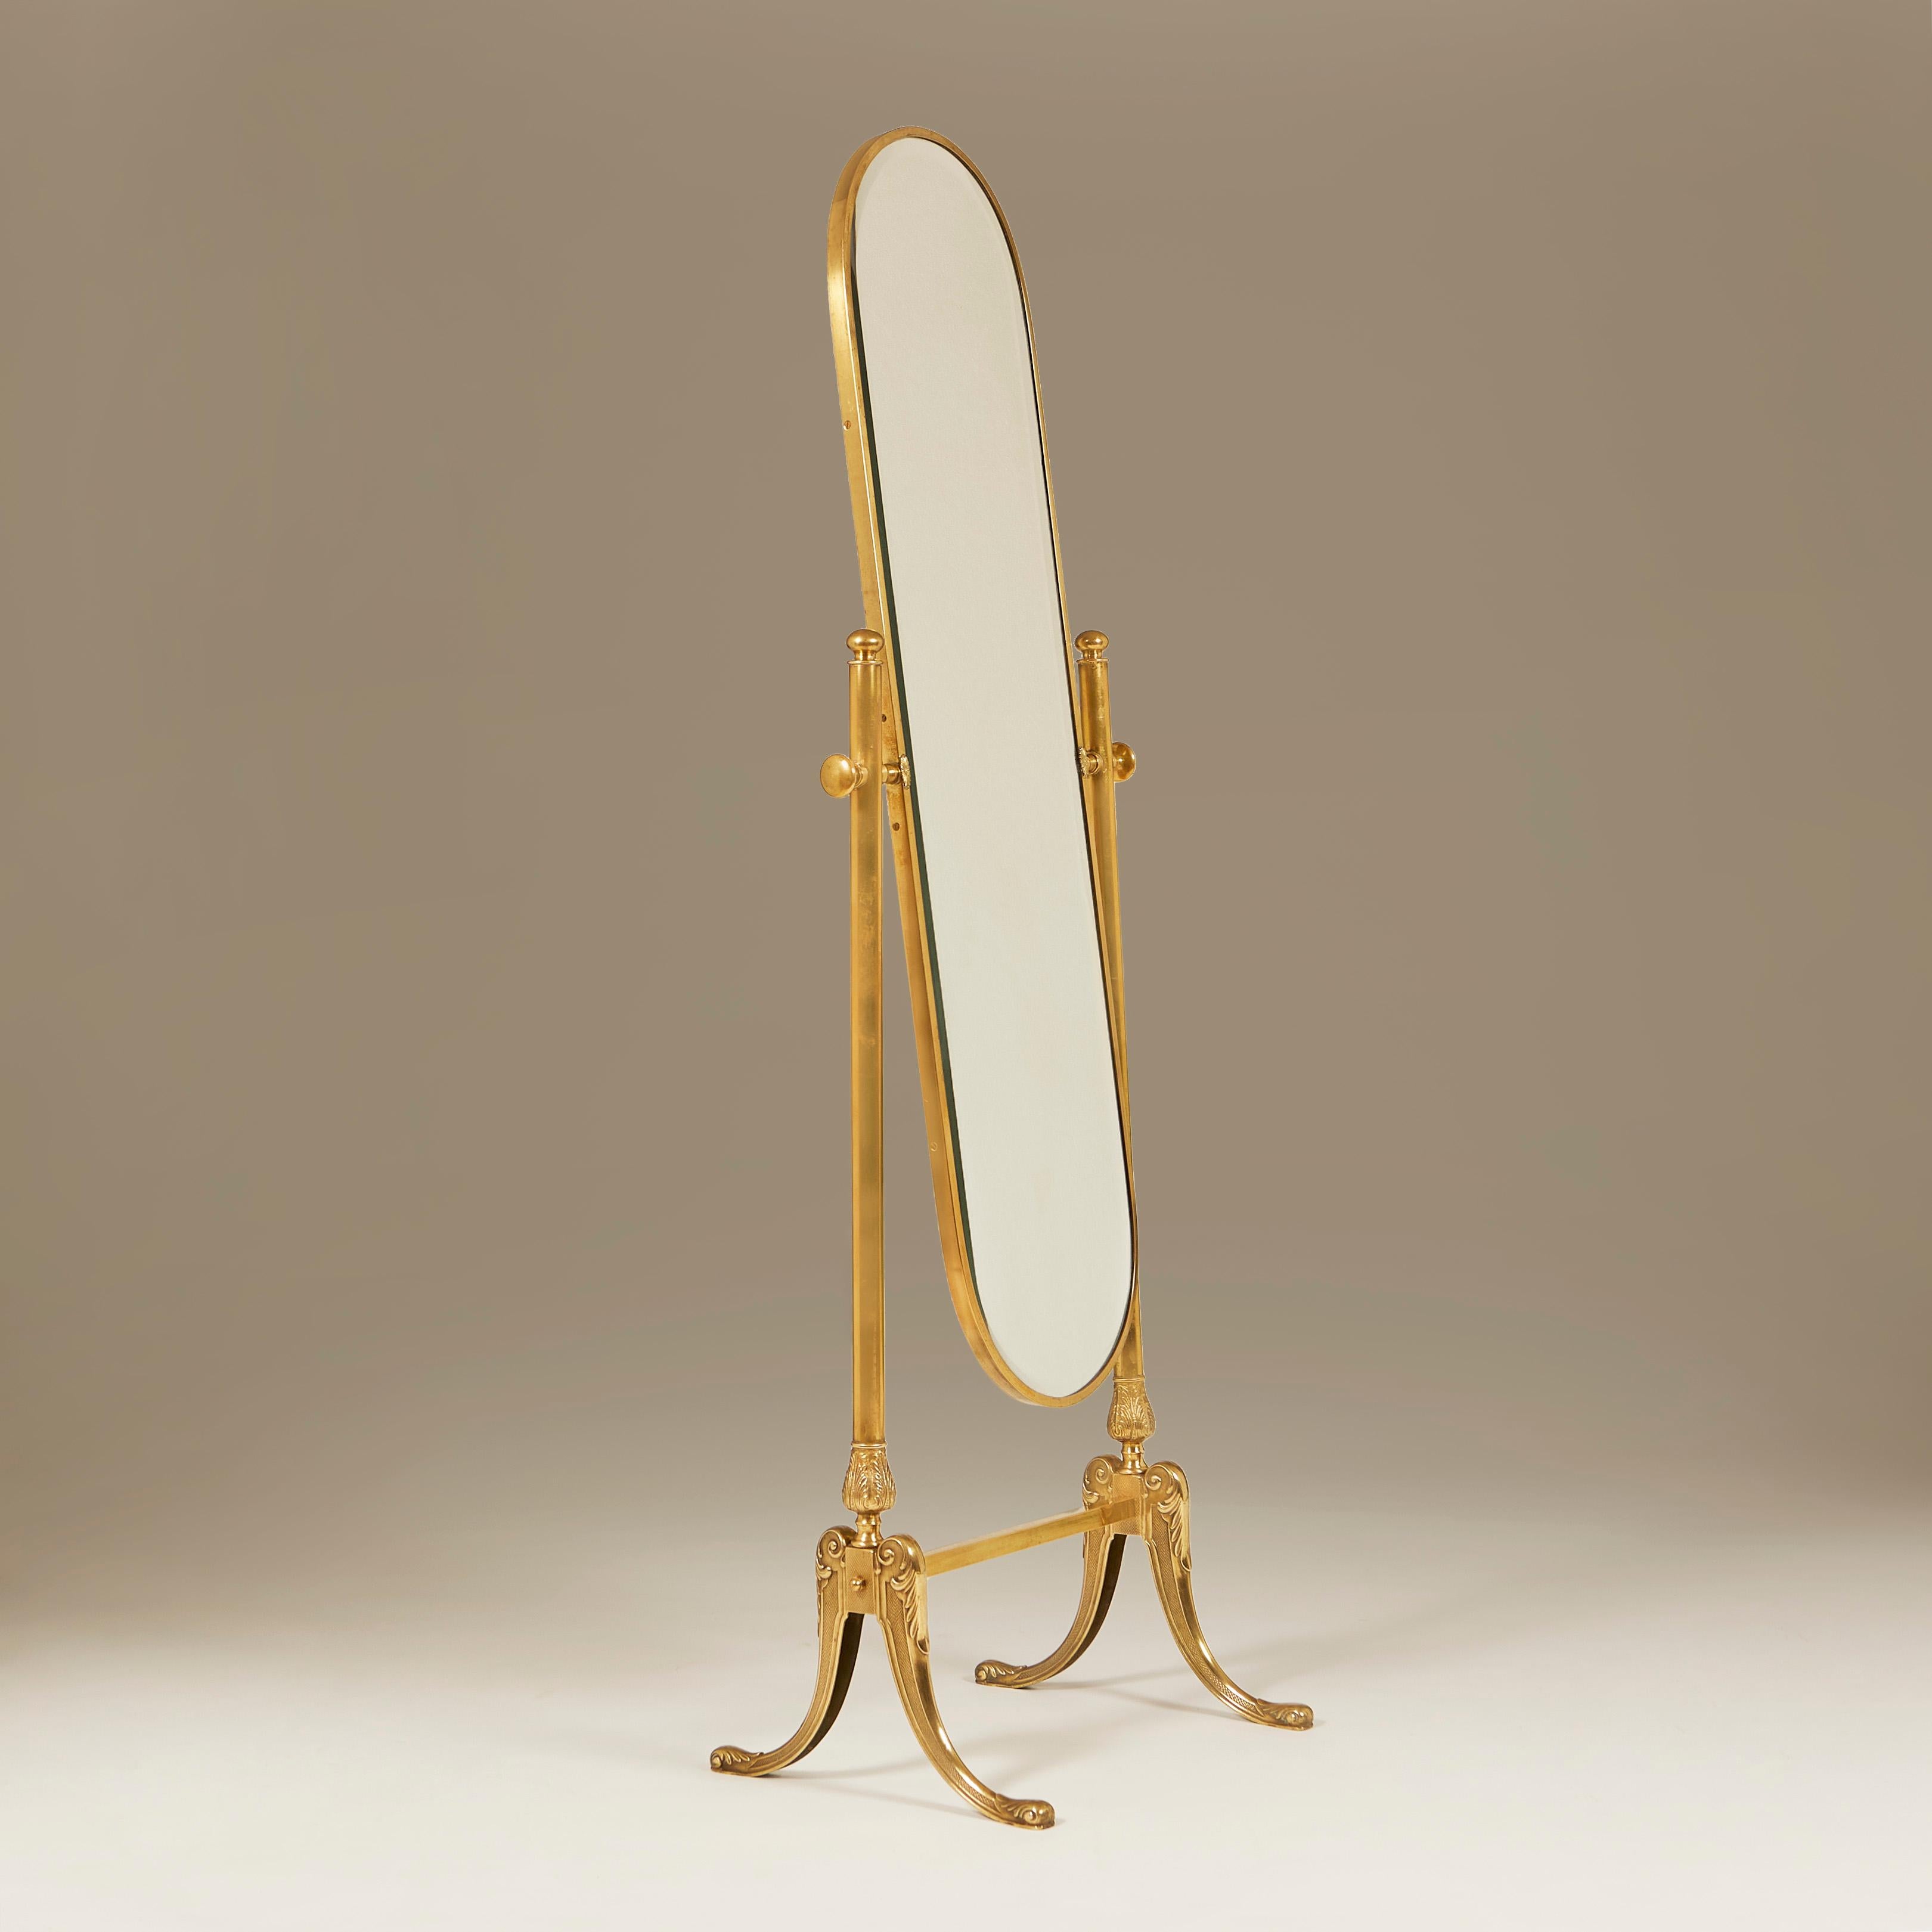 Brass full-length adjustable bevelled glass mirror with intricately-detailed cast brass splayed legs (see detailed image).